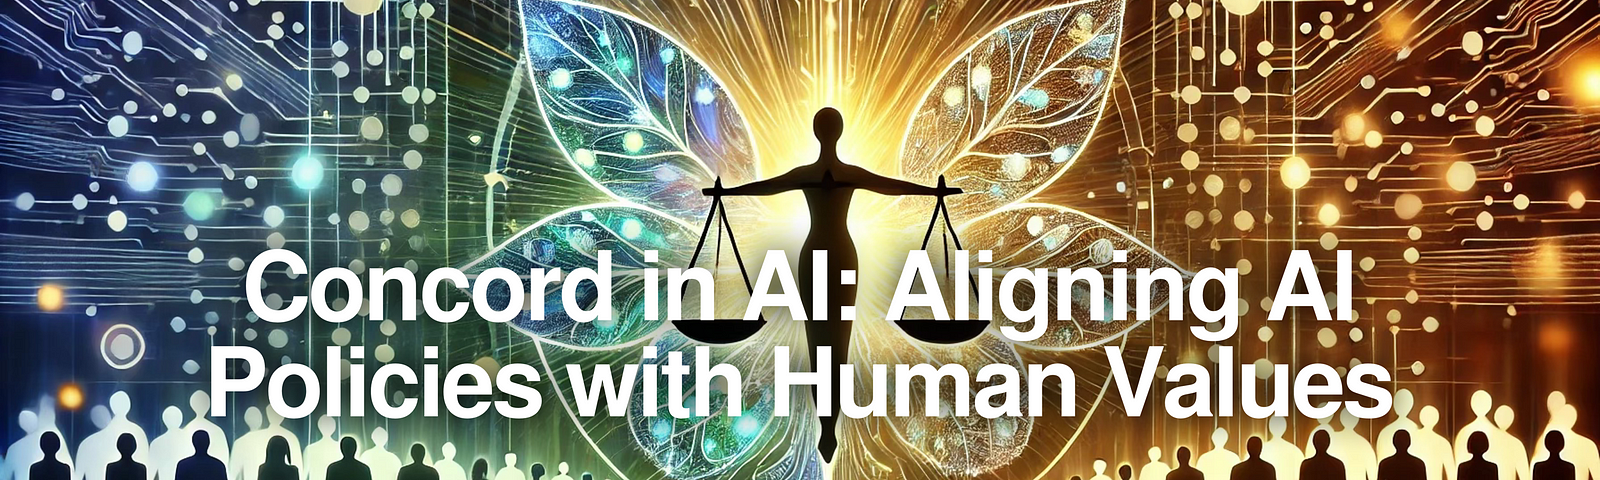 Concord in AI: Aligning AI Policies with Human Values | Adam M. Victor